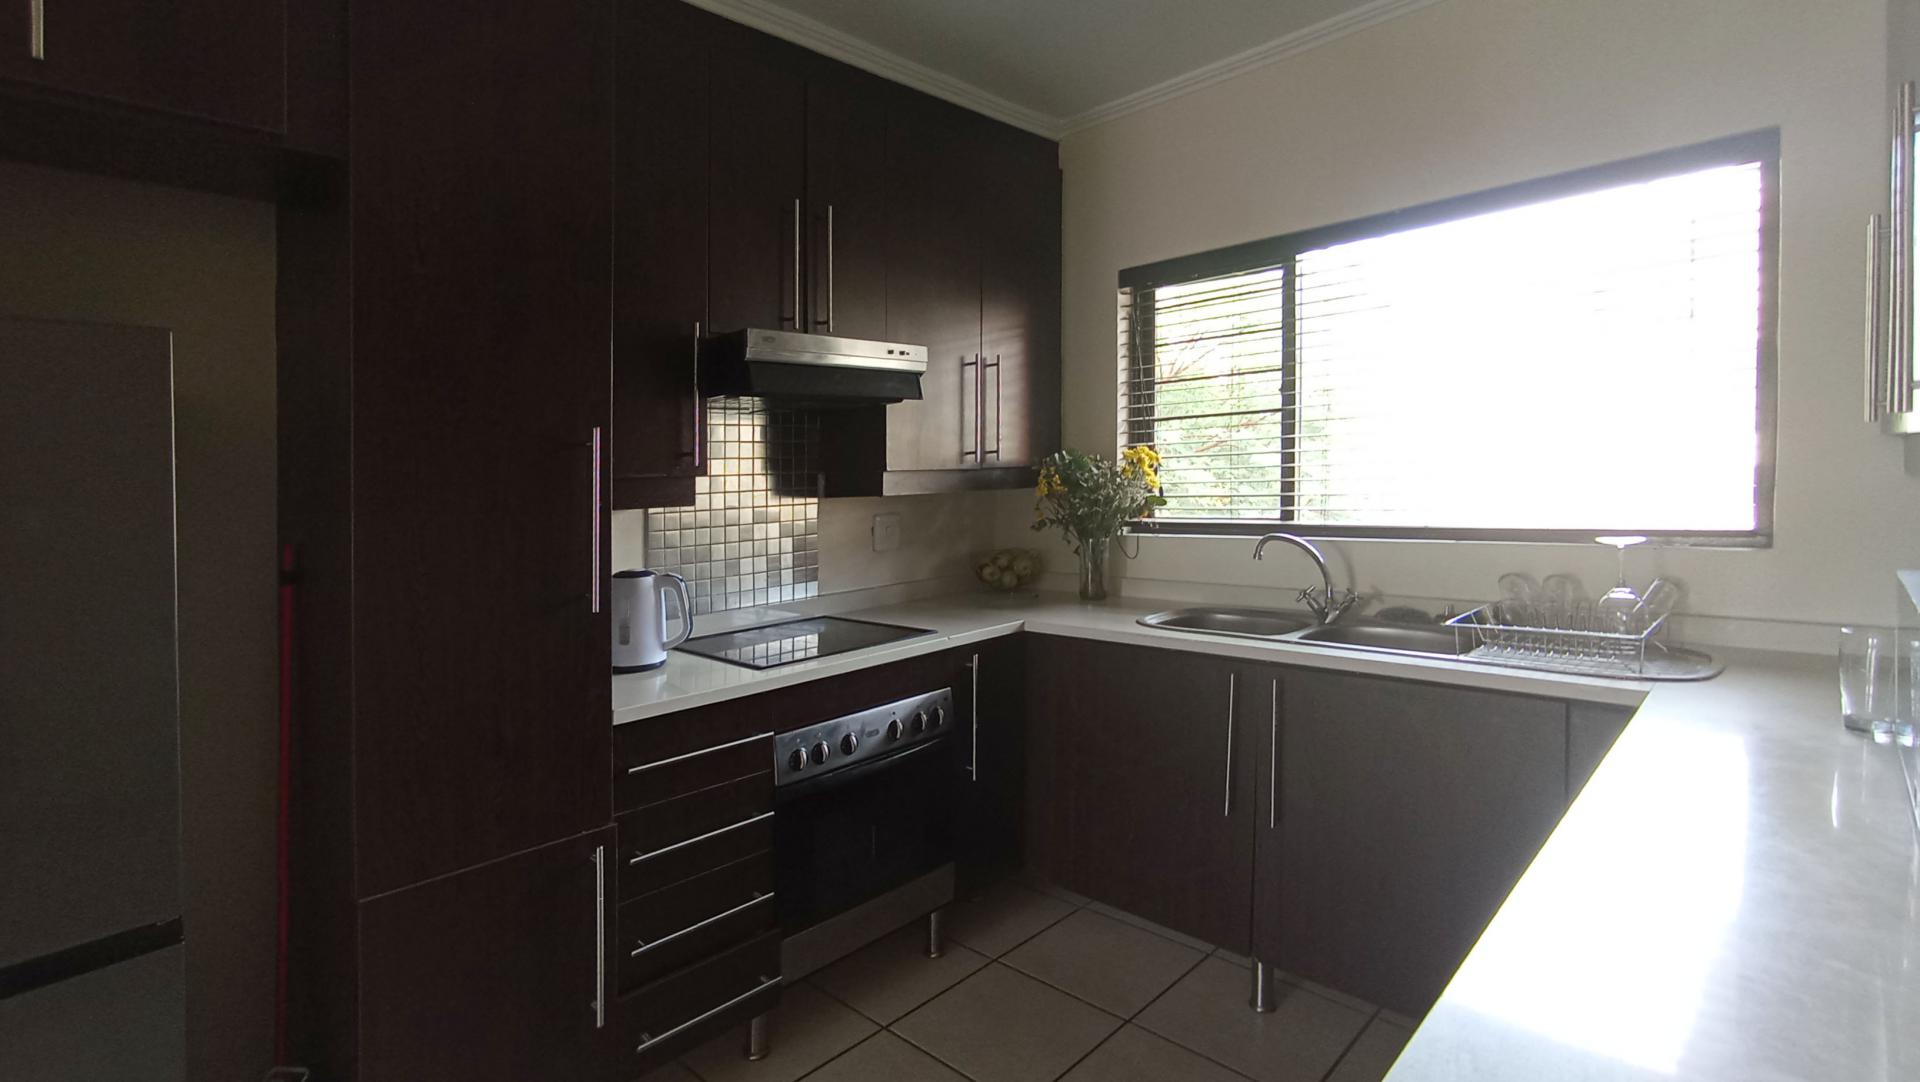 Kitchen - 11 square meters of property in Douglasdale